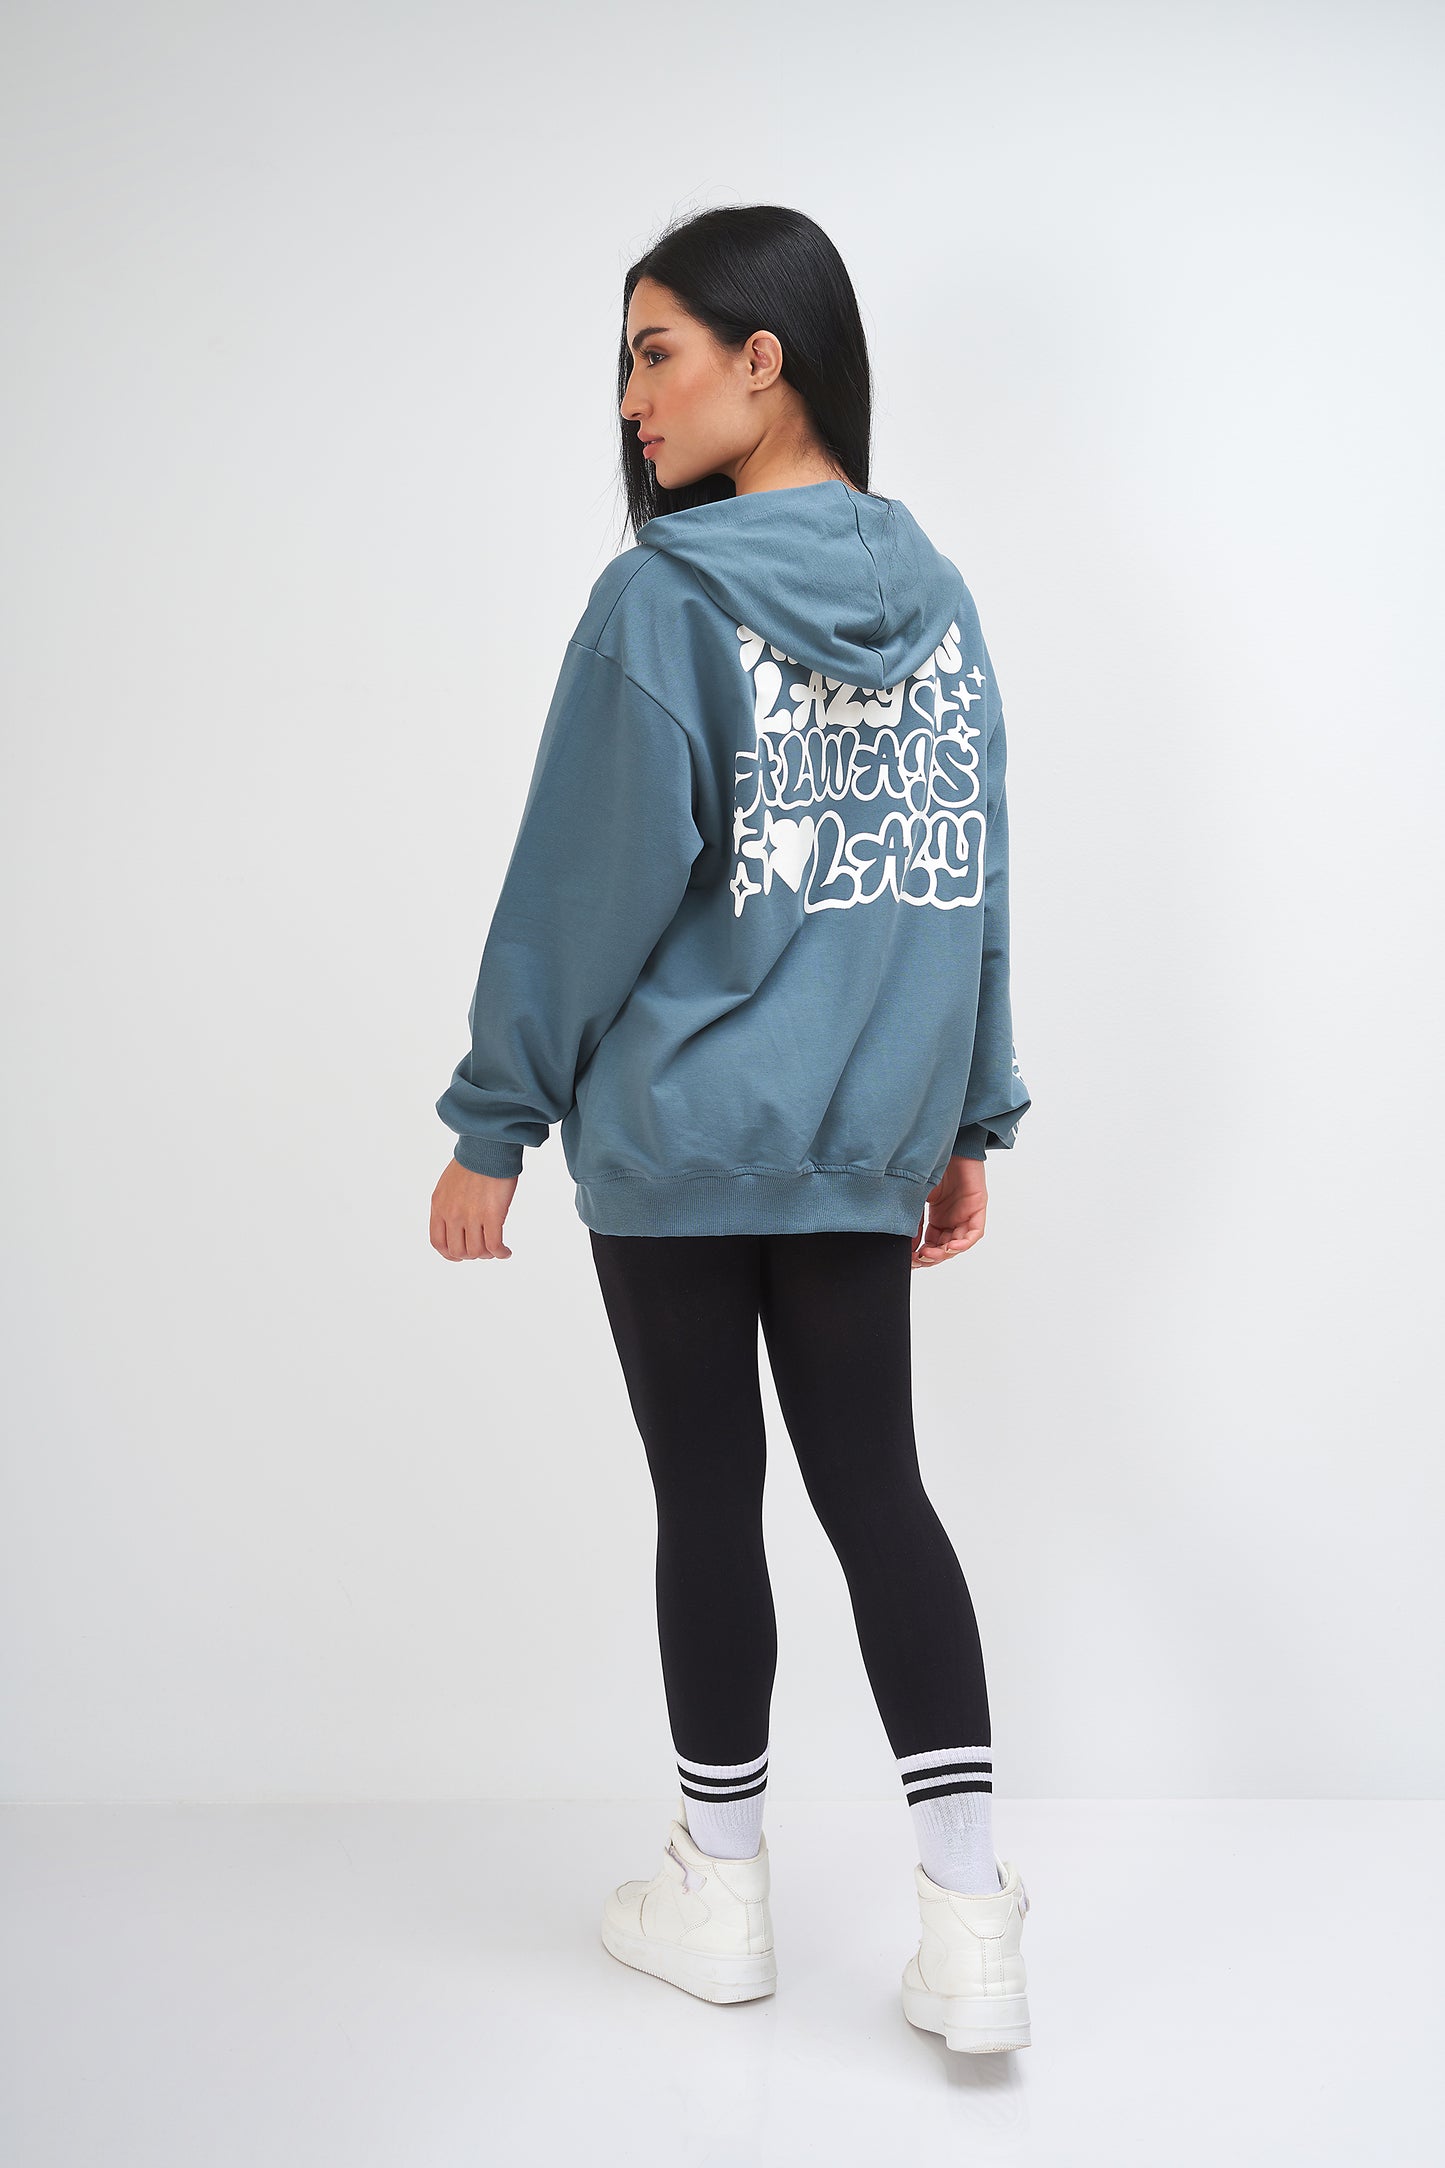 Sweatshirt with - (capecho) - print on the back